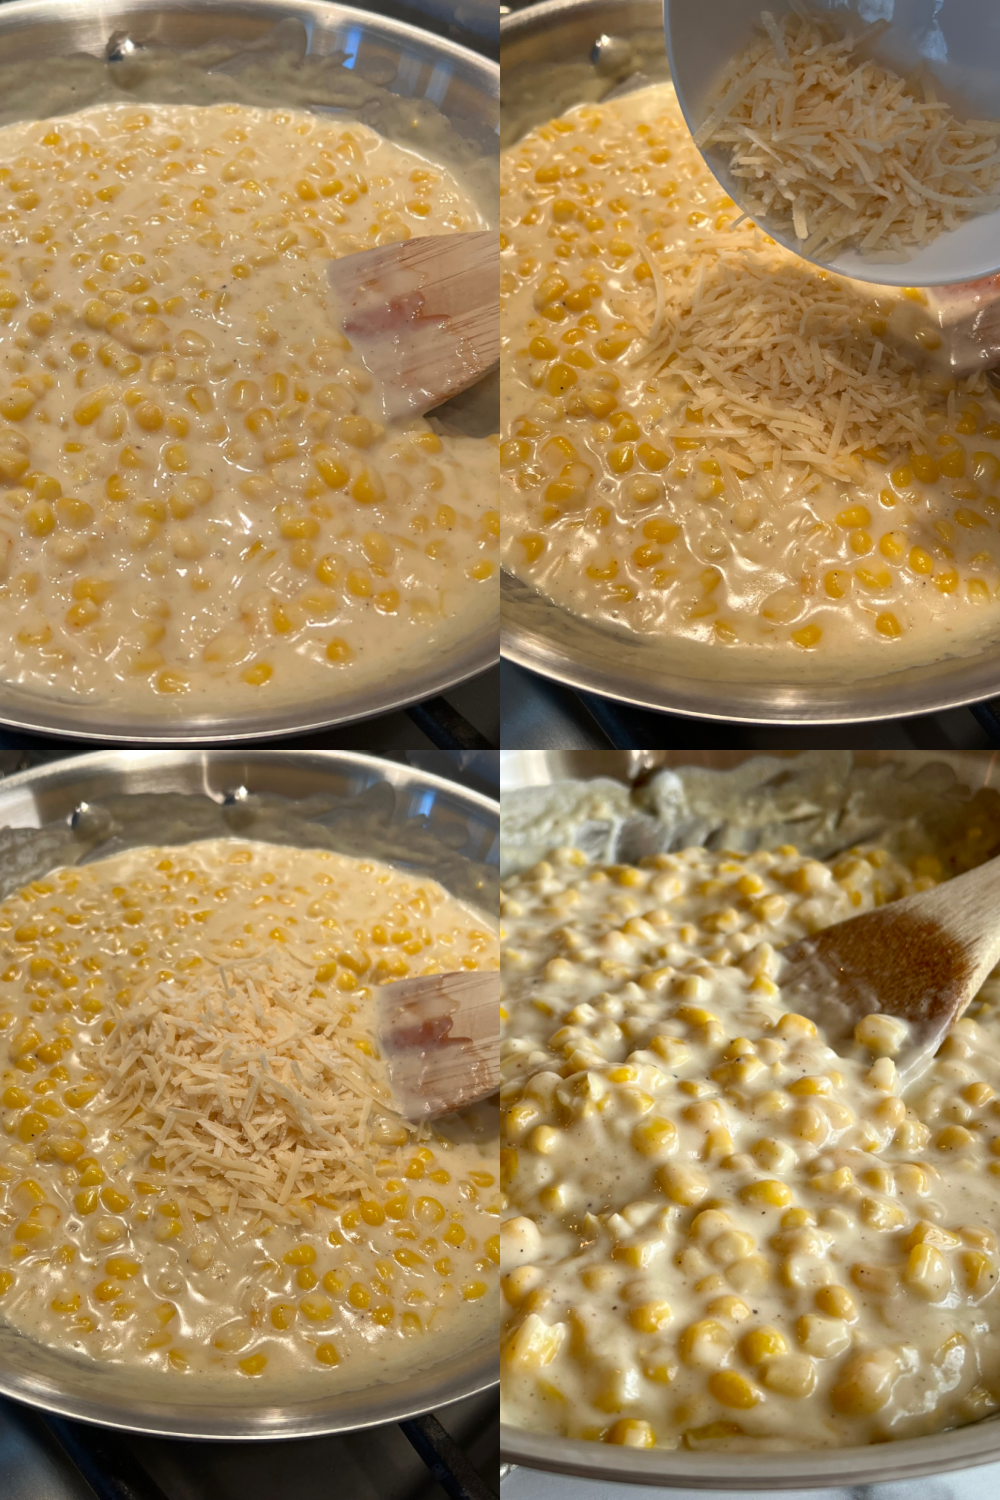 This is a 4 photo collage showing the Creamed Corn being made in a skillet on a stove top.